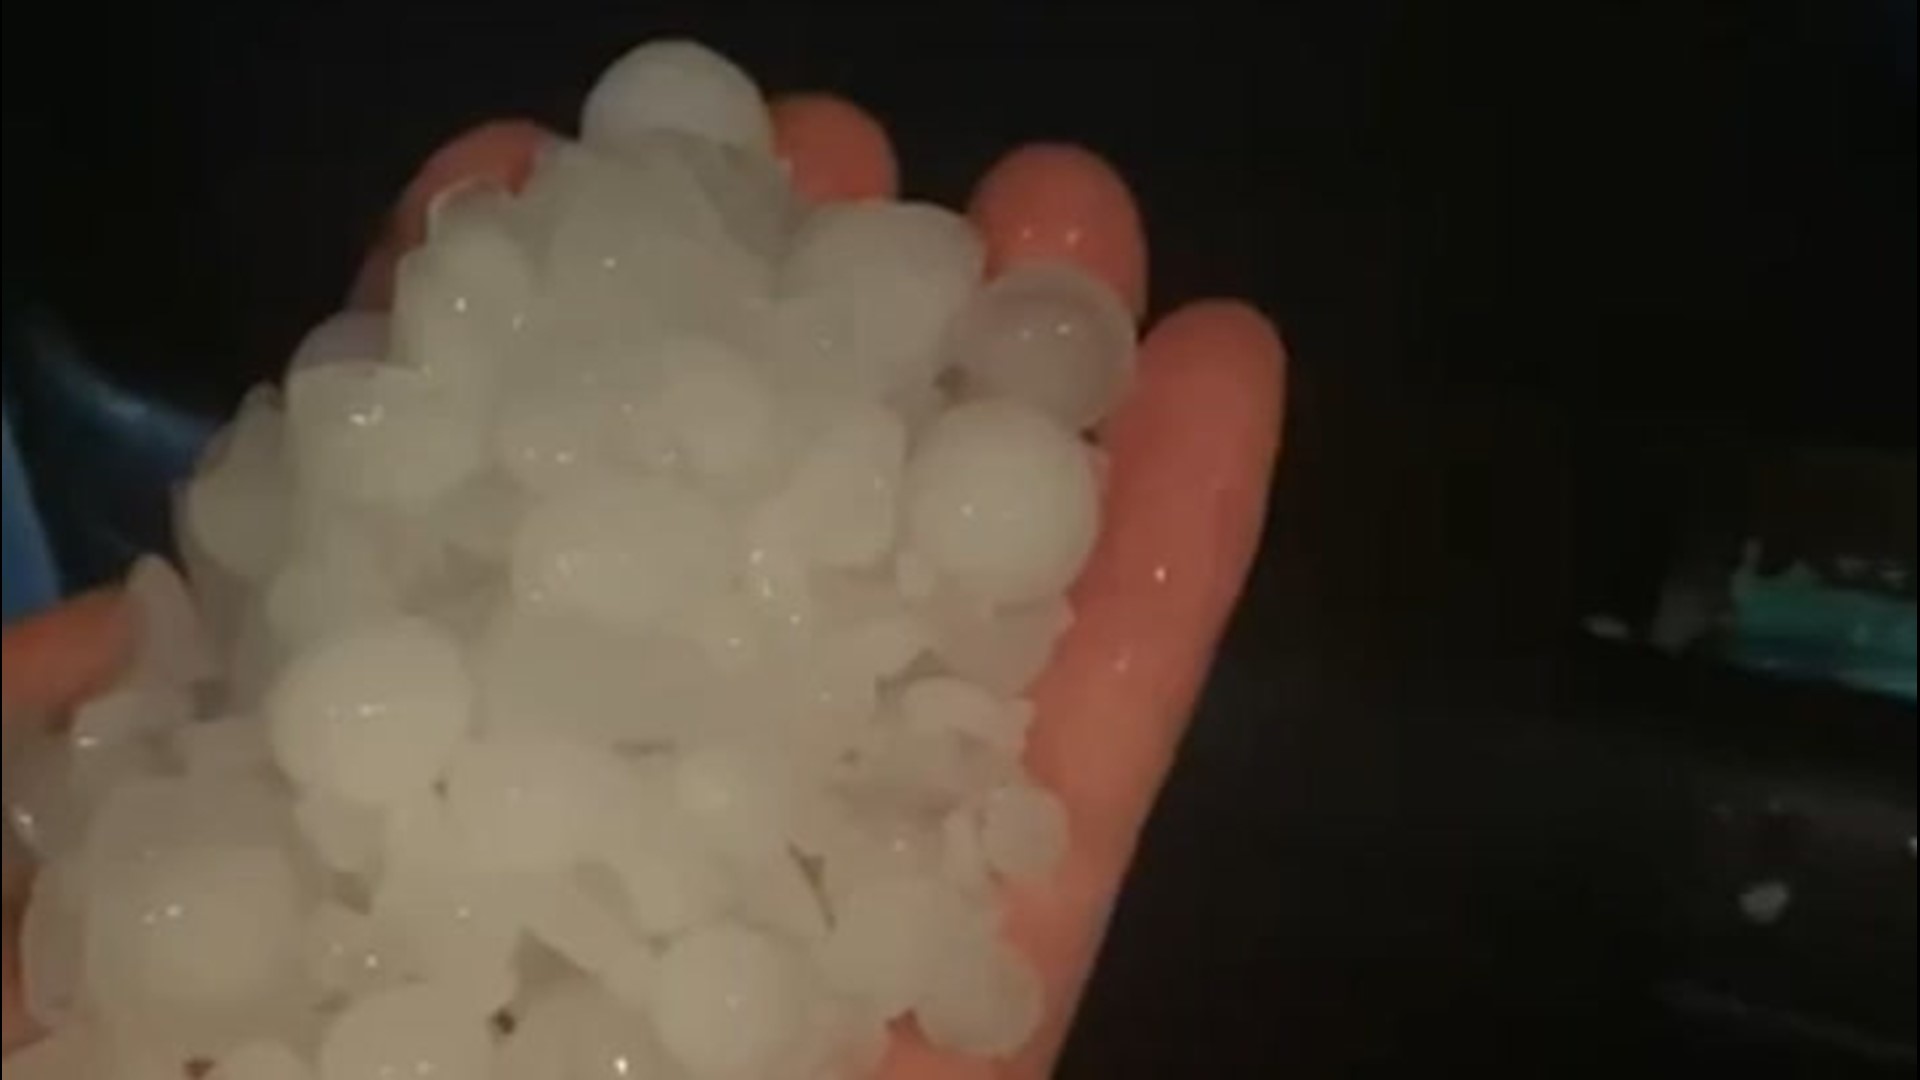 A supercell thunderstorm on July 11 brought marble-sized hailstones to Siloam Springs, Arkansas, damaging cars, roofs of buildings and properties.